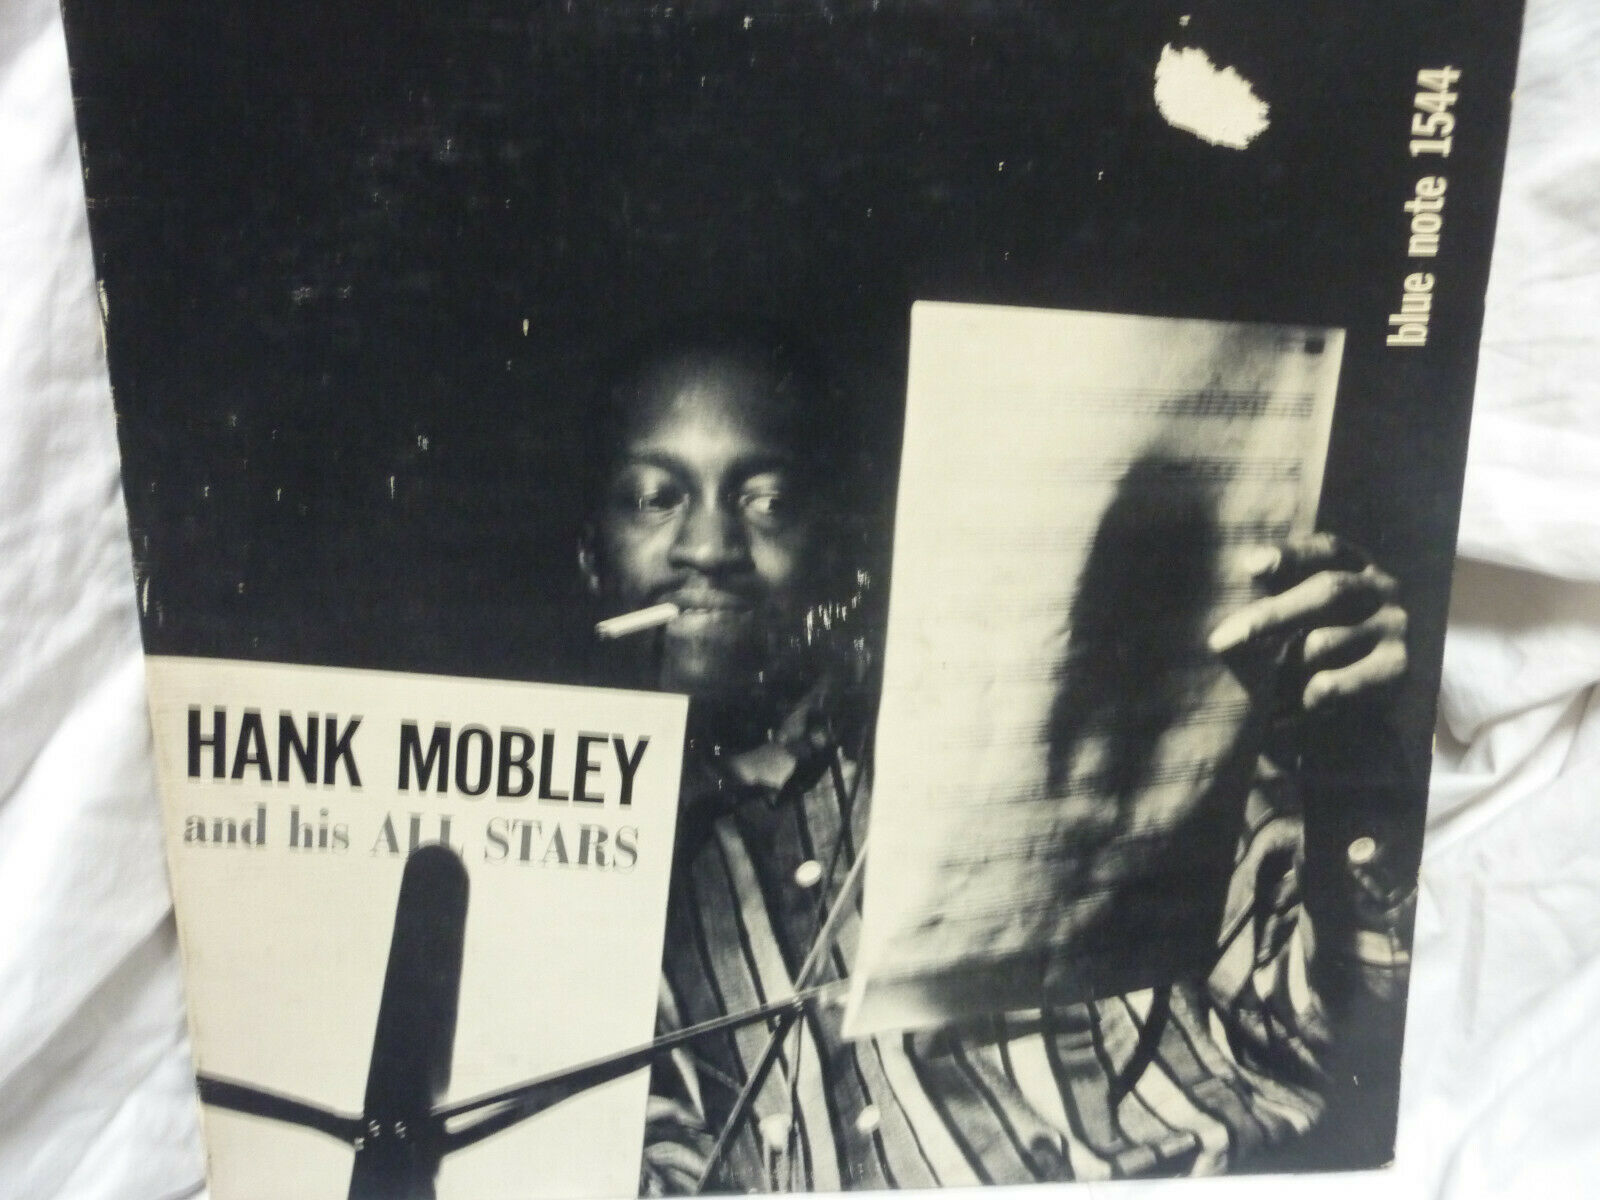 Pic 1 Hank Mobley -and his all stars- BLUE NOTE  1544, W 63RD,DG, RVG,Ear  9M